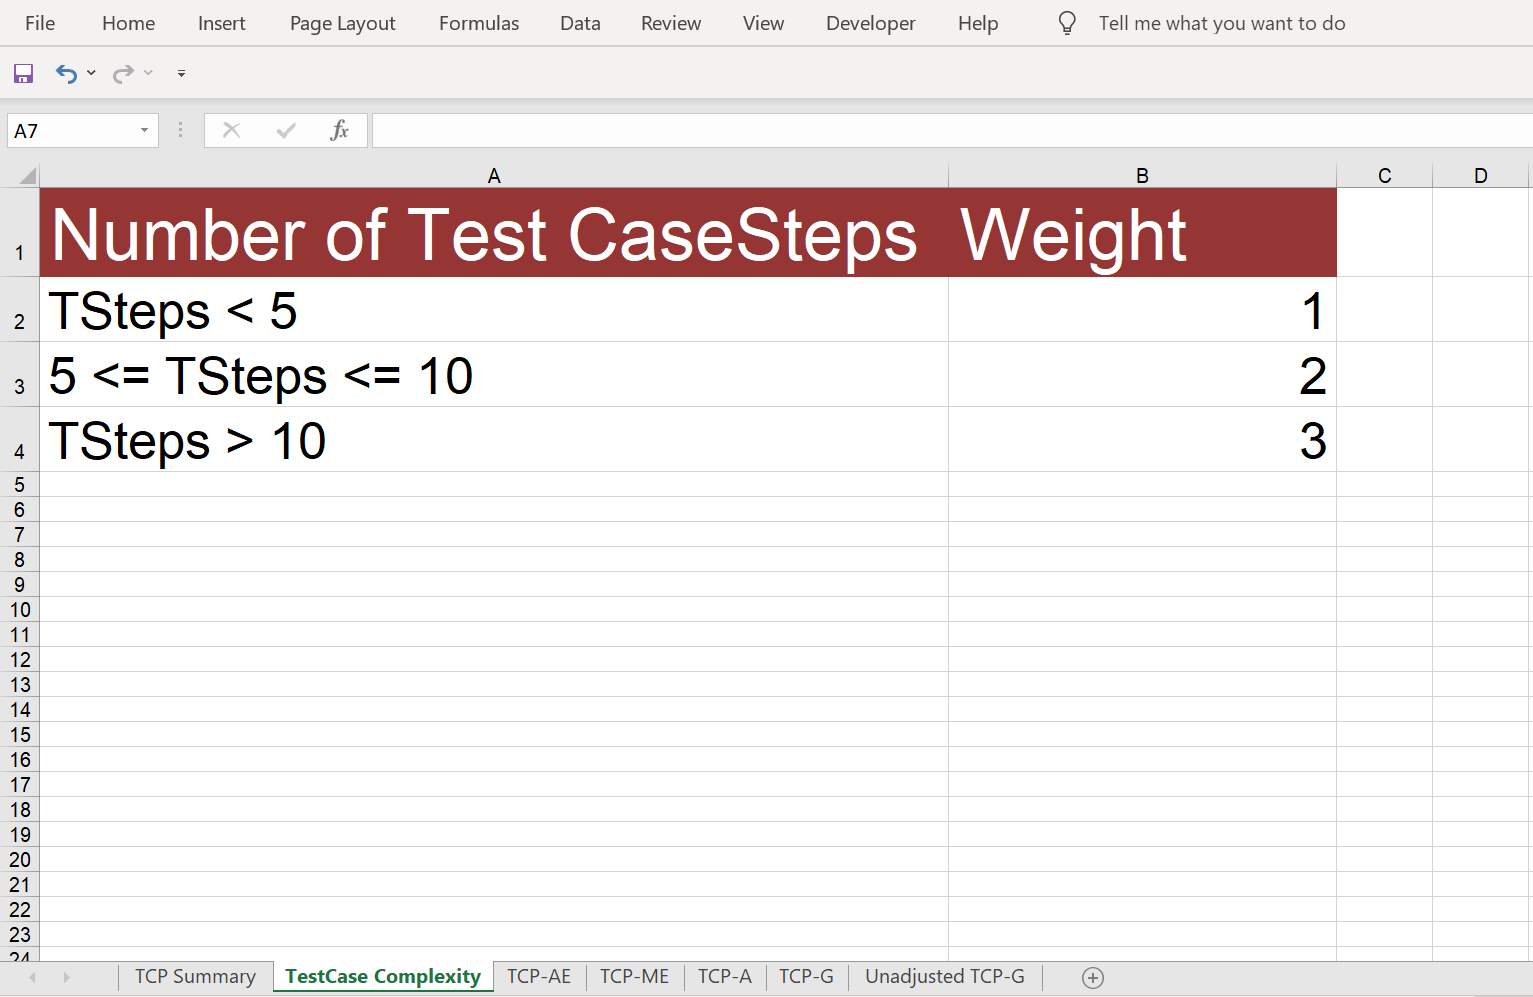 Test Case Complexity